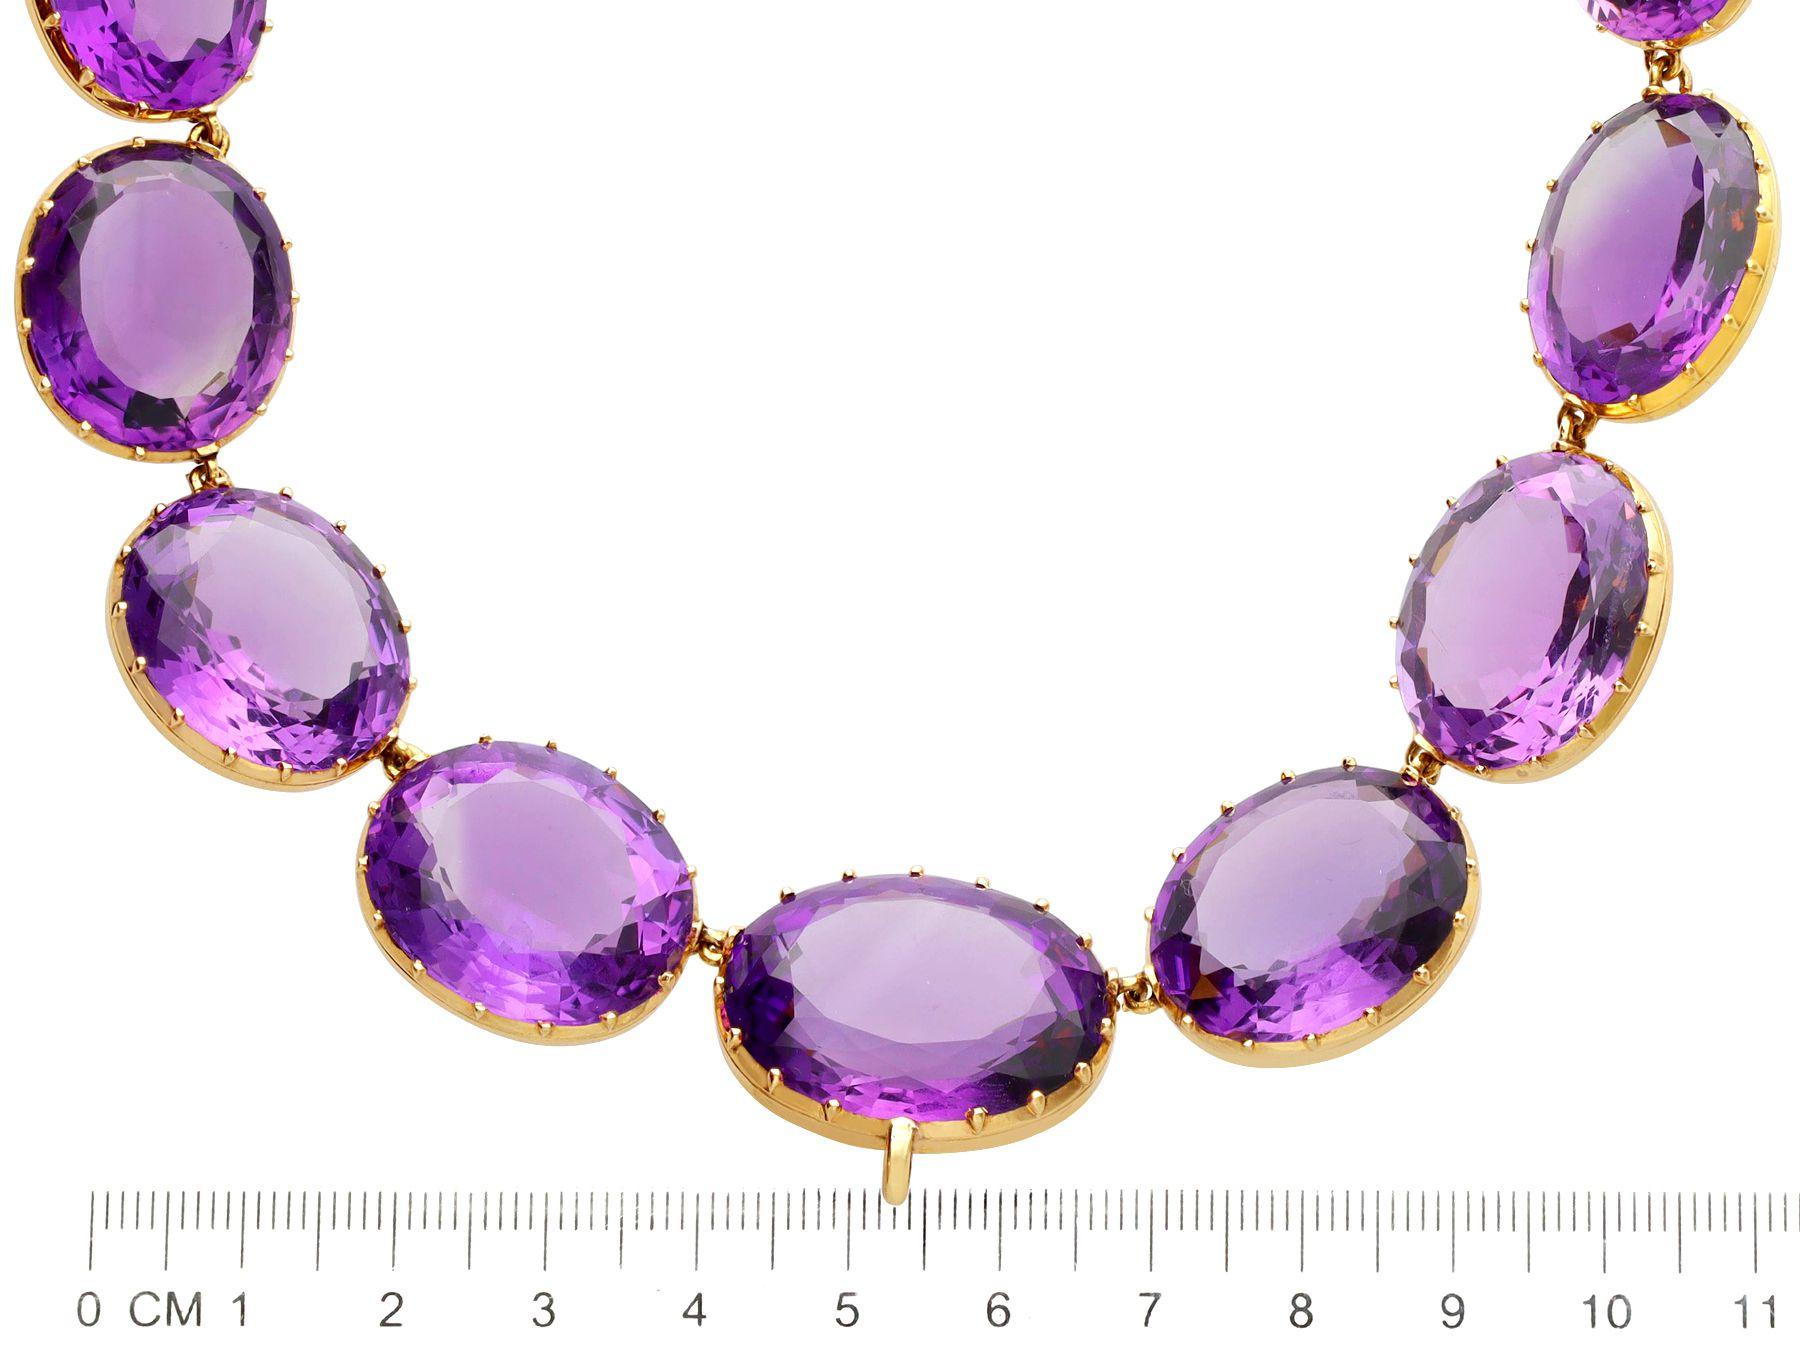 Victorian Antique 396.09 Carat Amethyst and 14K Yellow Gold Riviere / Collarette Necklace For Sale